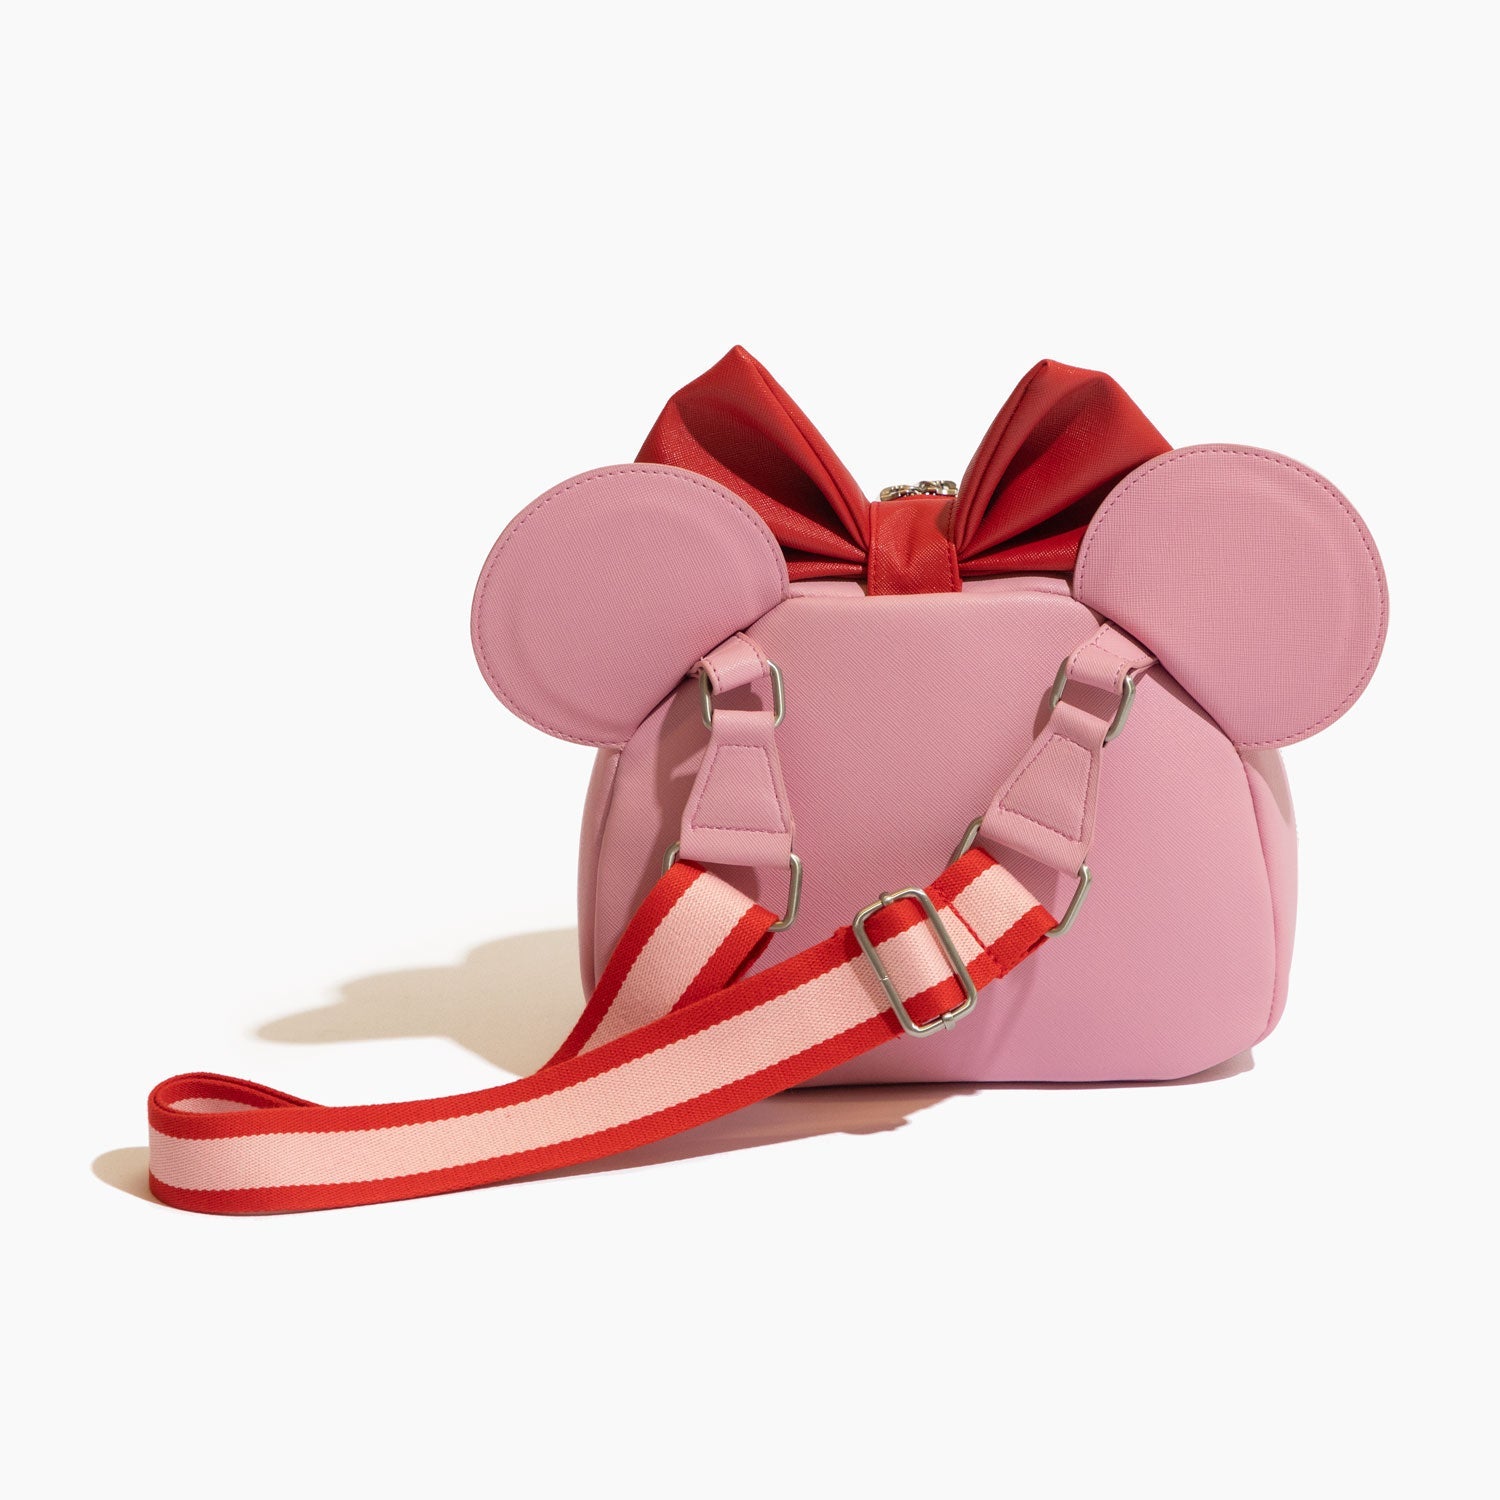 Today's Disney discovery is all about Minnie Mouse, fashion and  fabulousness! Today's Disney discovery is the Minnie Mouse qu… | Disney  purse, Bags, Disney handbags